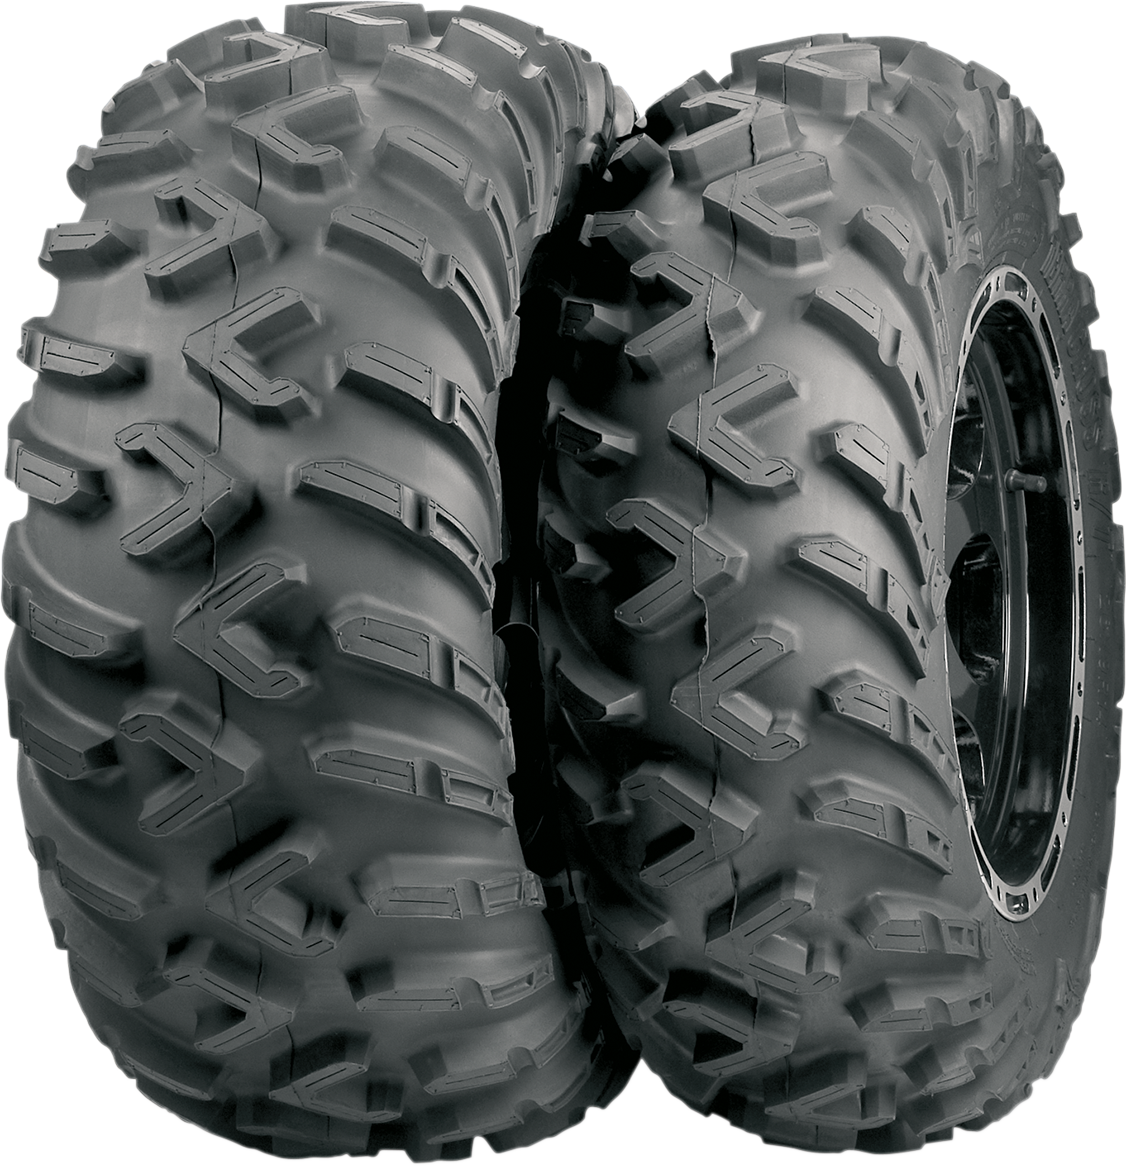 ITP Tire - Terracross R/T - Front - 25x8R12 - 6 Ply 560423